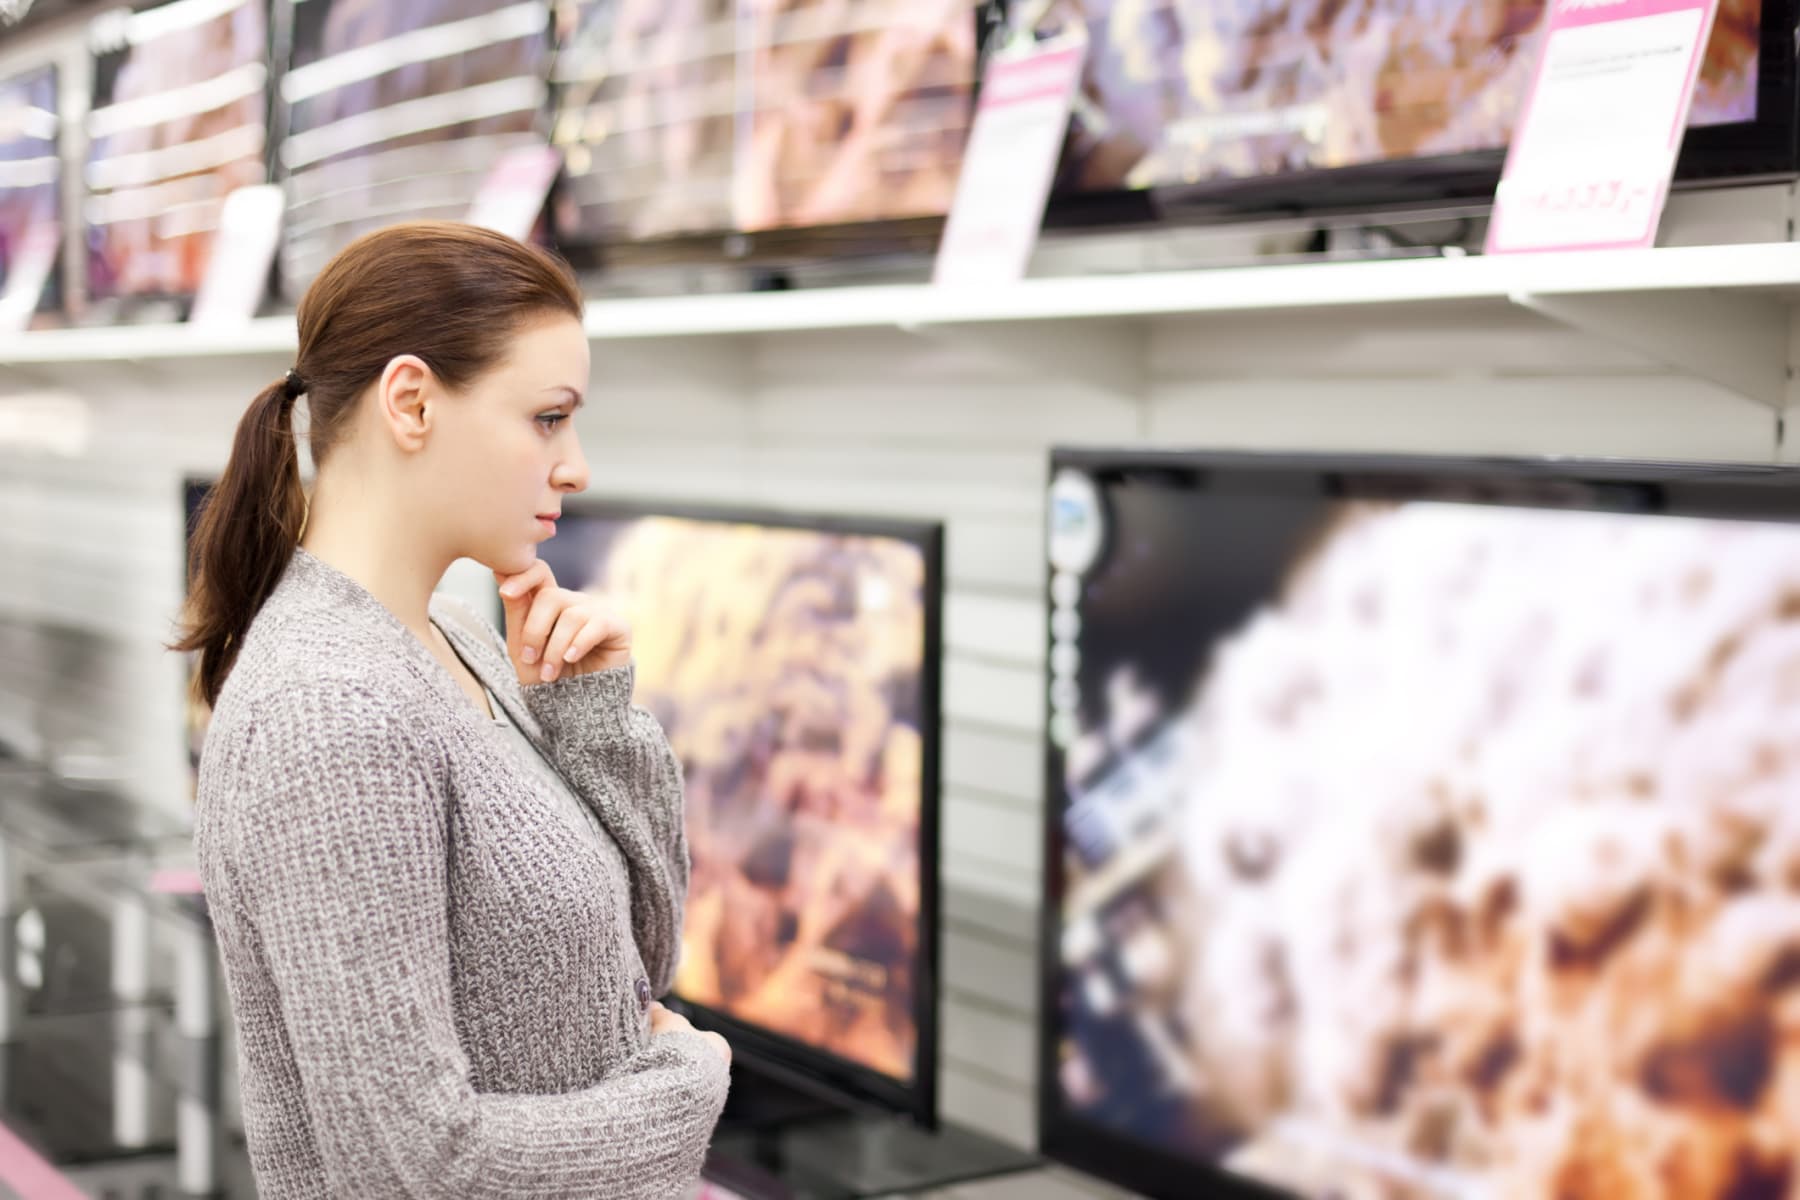 Woman checks out televisions while browsing in store.